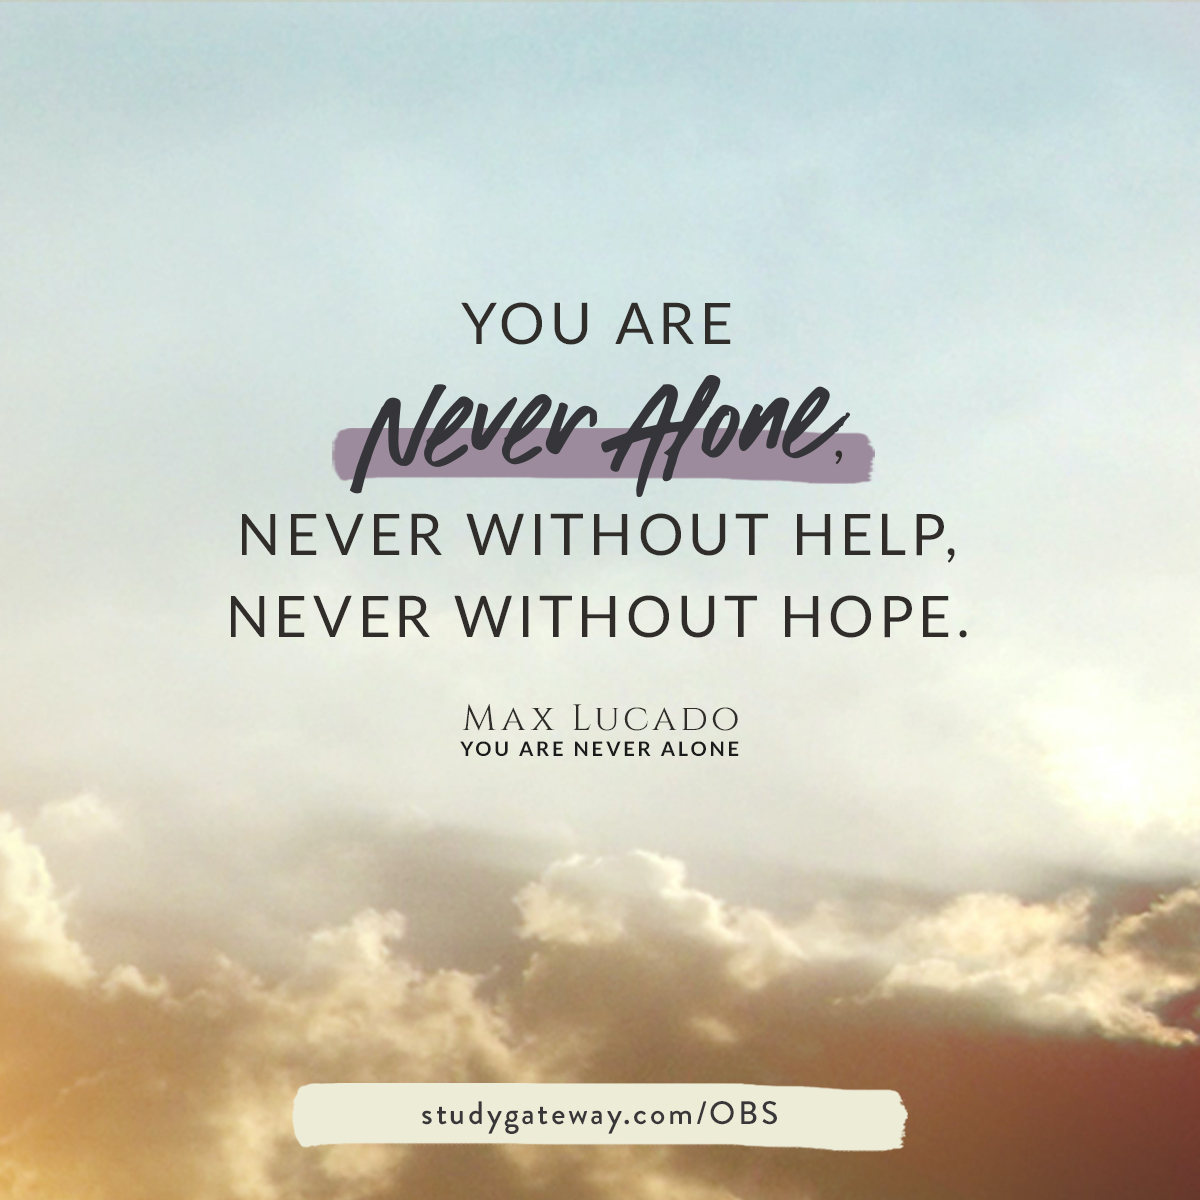 You Are Never Alone Week 3 — God Is with You in the Storm